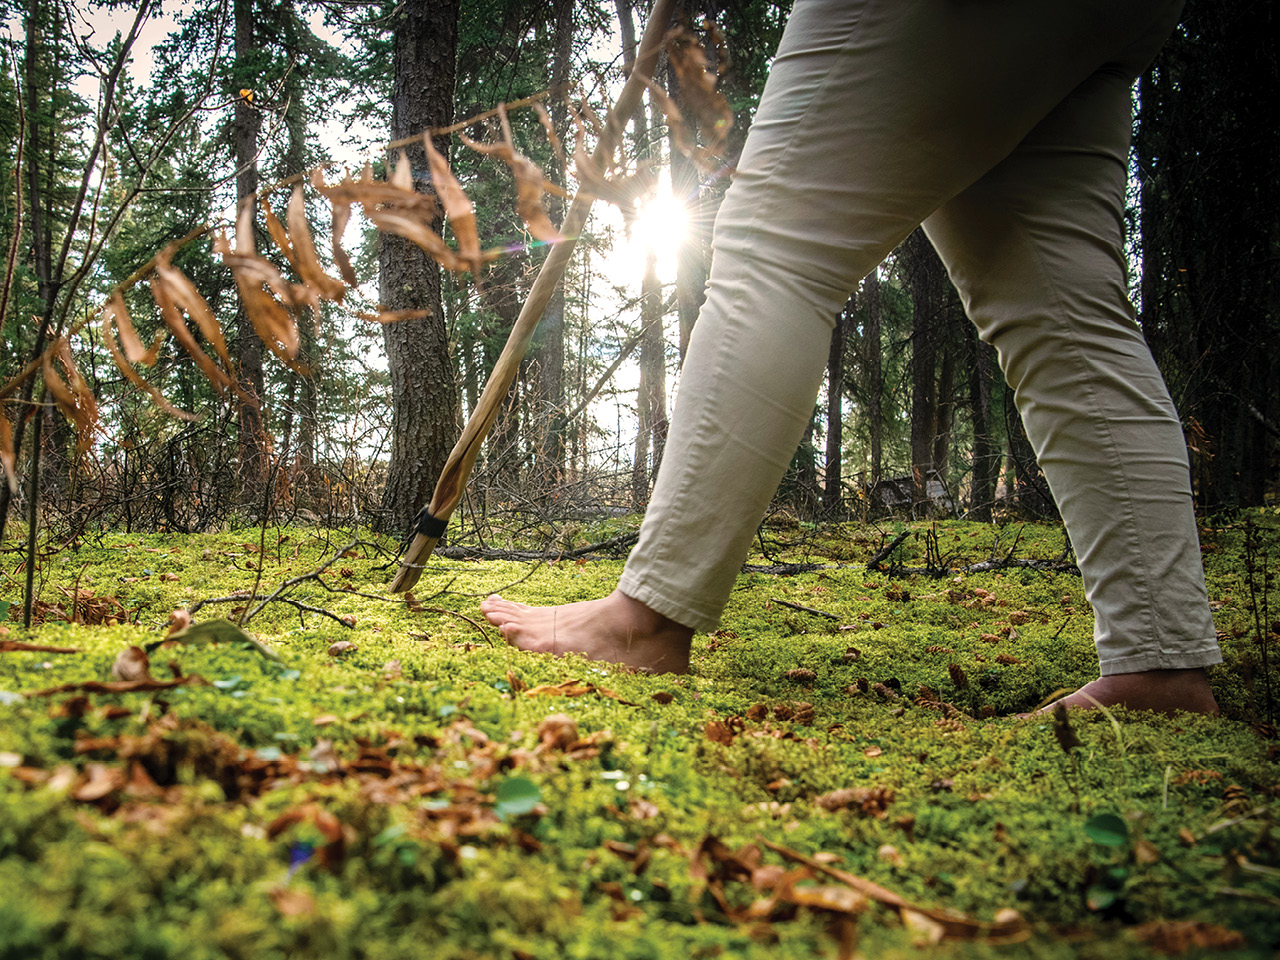 Sara Rose walks barefoot with a walking stick over mossy ground in the forest, wearing grey jeans as the sun peers through trees in the background.